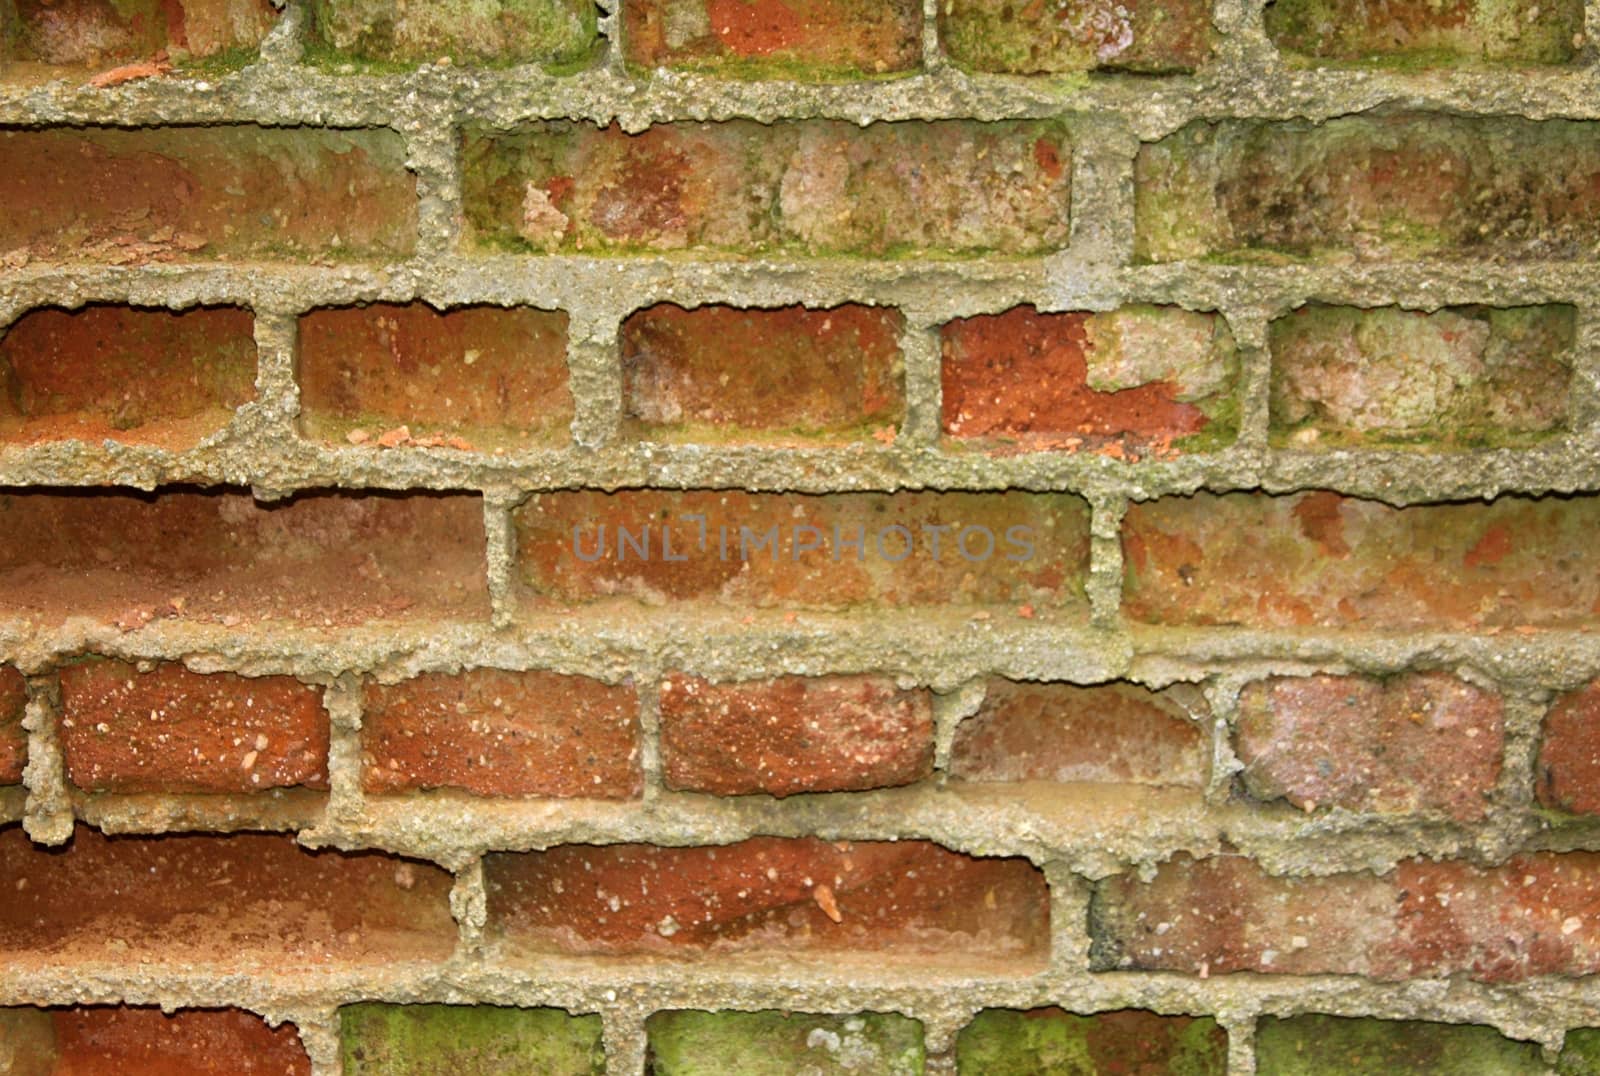 Background of red brick wall pattern texture with moss